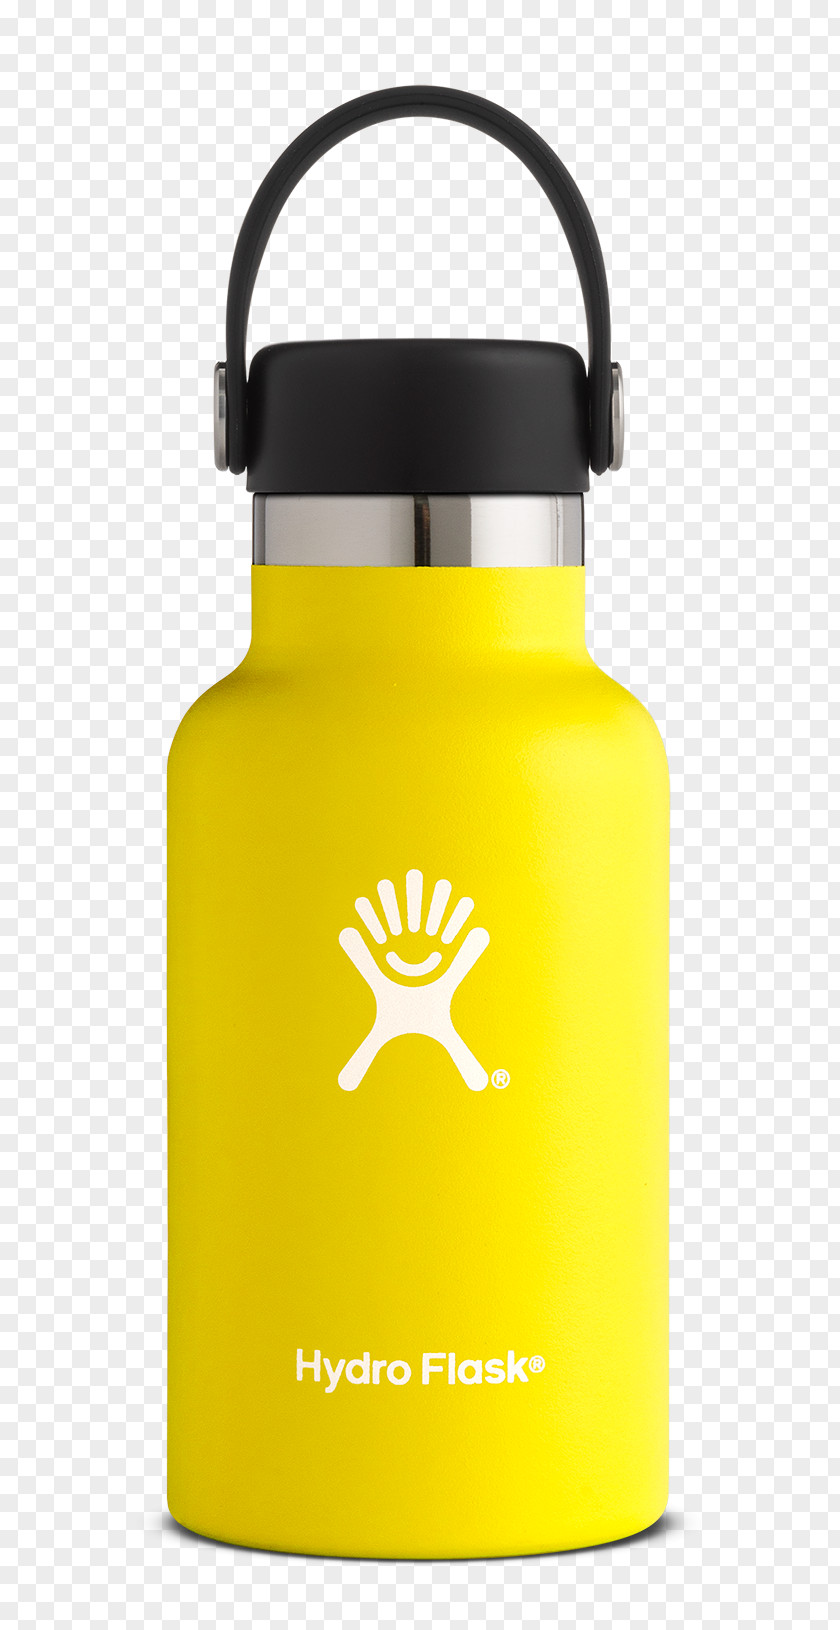 Bottle Water Bottles Drink Ounce Hydro Flask 21 Oz Vacuum Insulated Stainless Steel Bottle, Standard Mouth W/loop Cap, Cobalt PNG